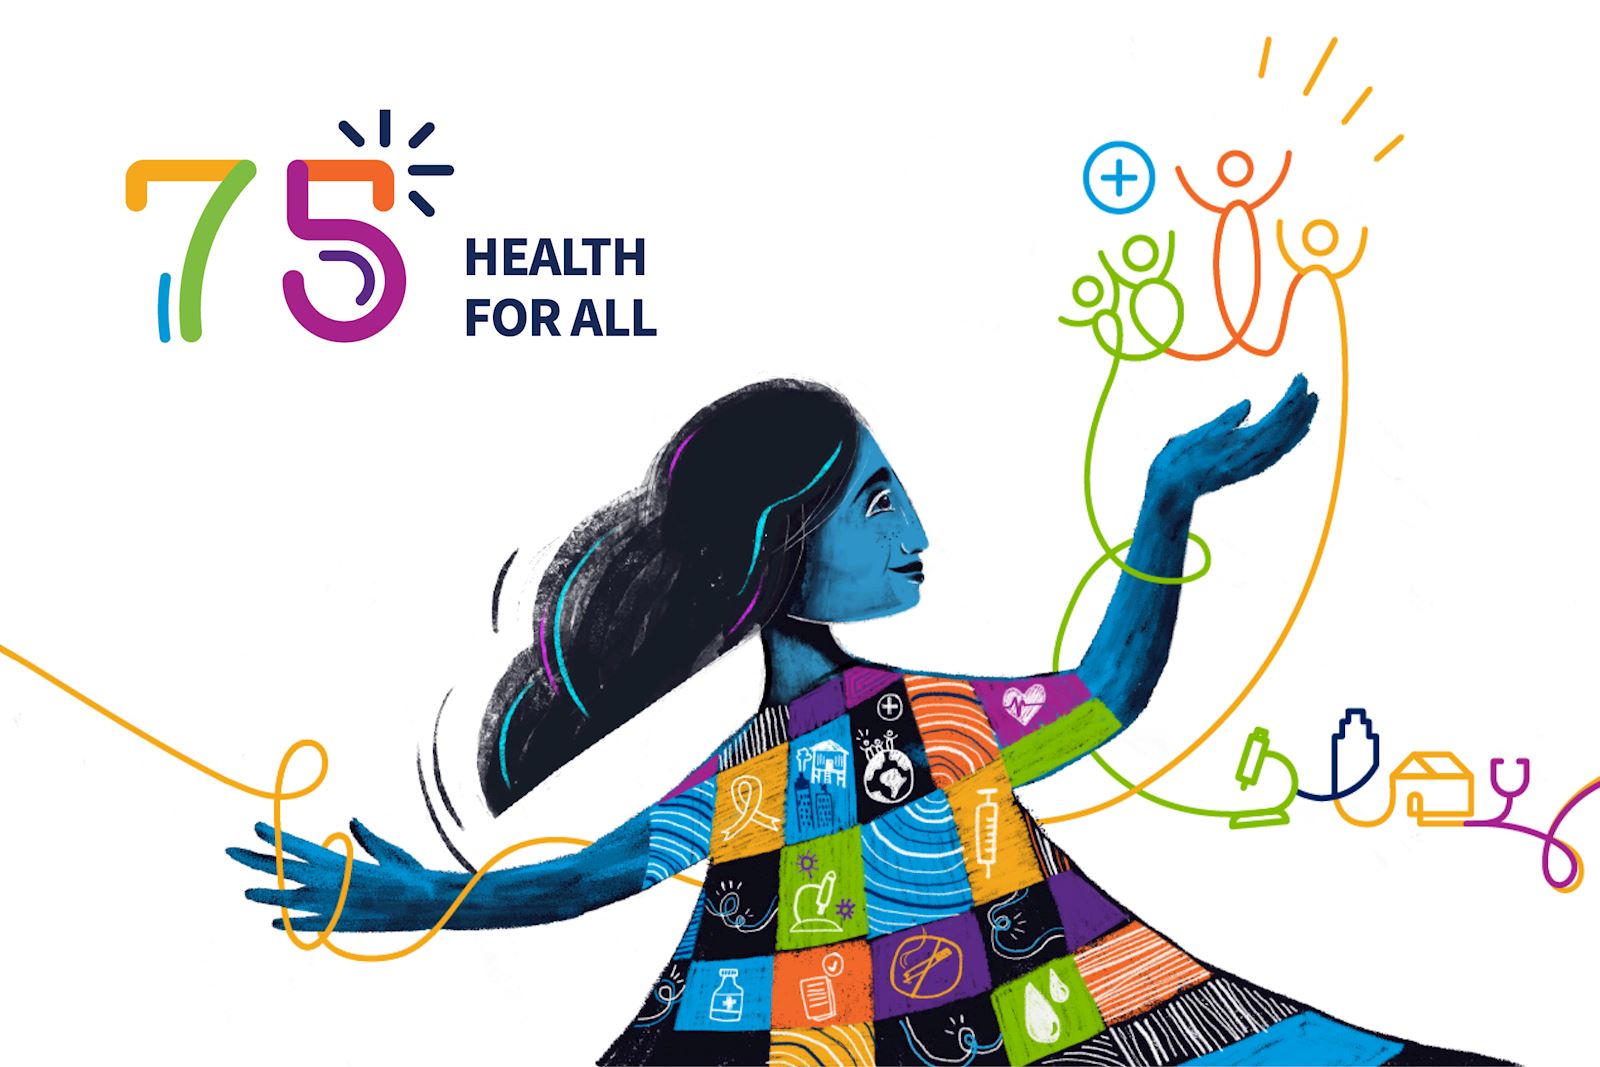 World Health Day: Health for all